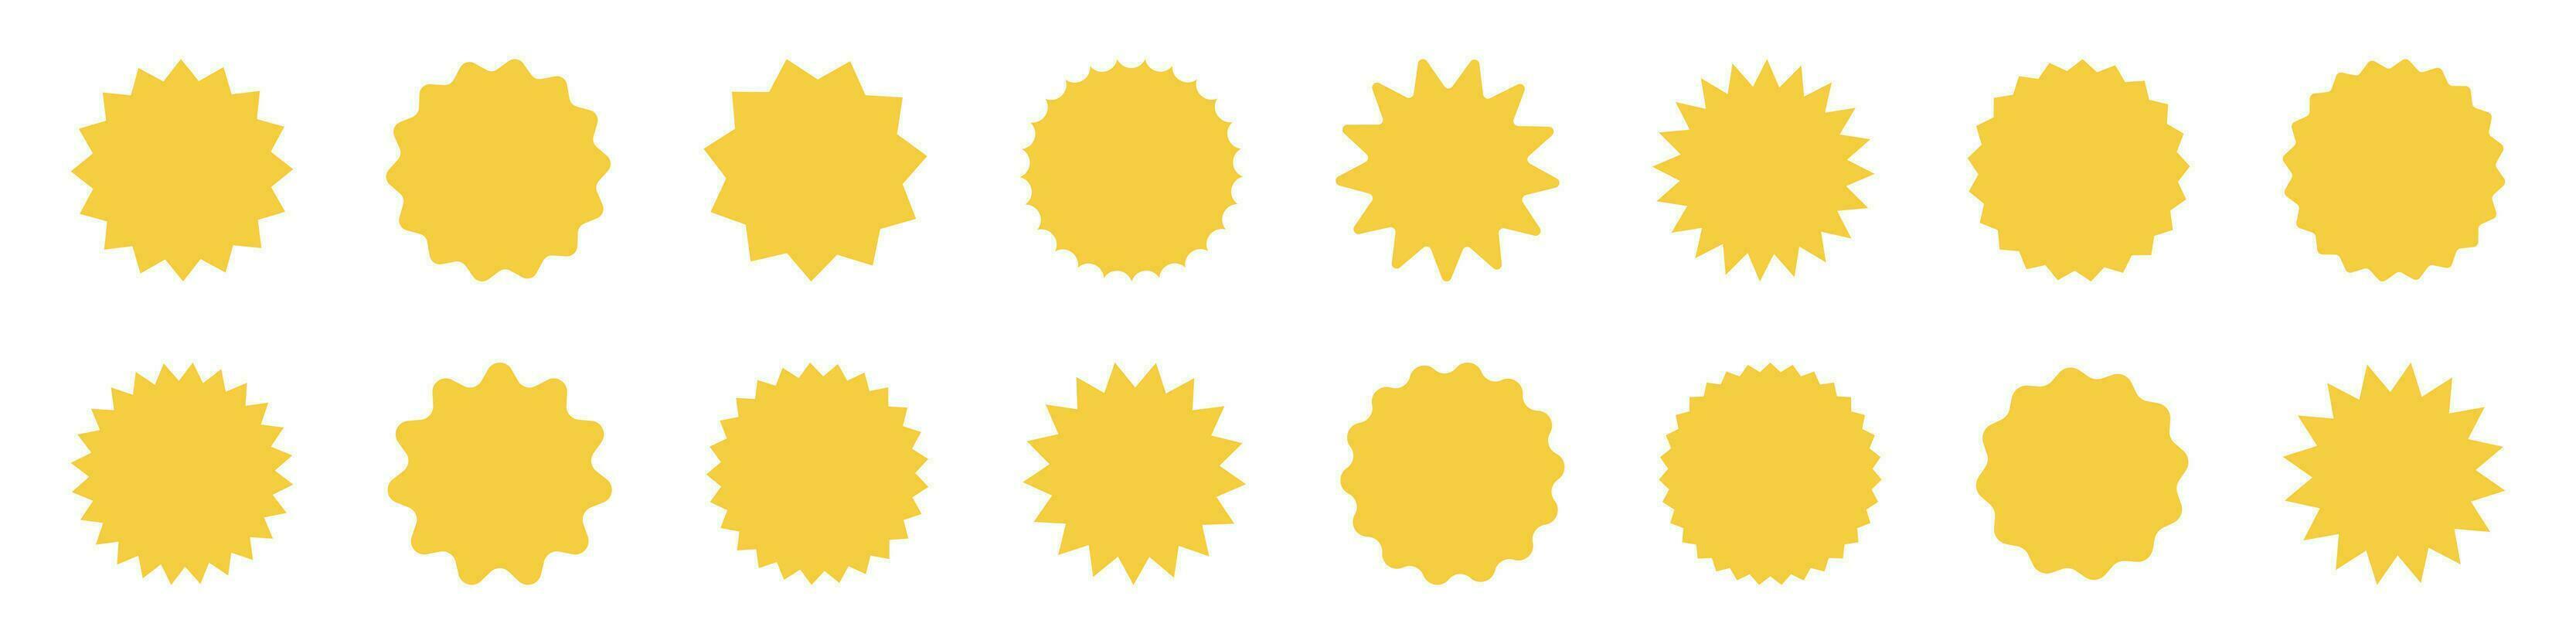 Yellow shopping labels collection. Special offer price tag. Sale or discount sticker. Supermarket promotional badge. Sunburst icons. Stock vector. vector